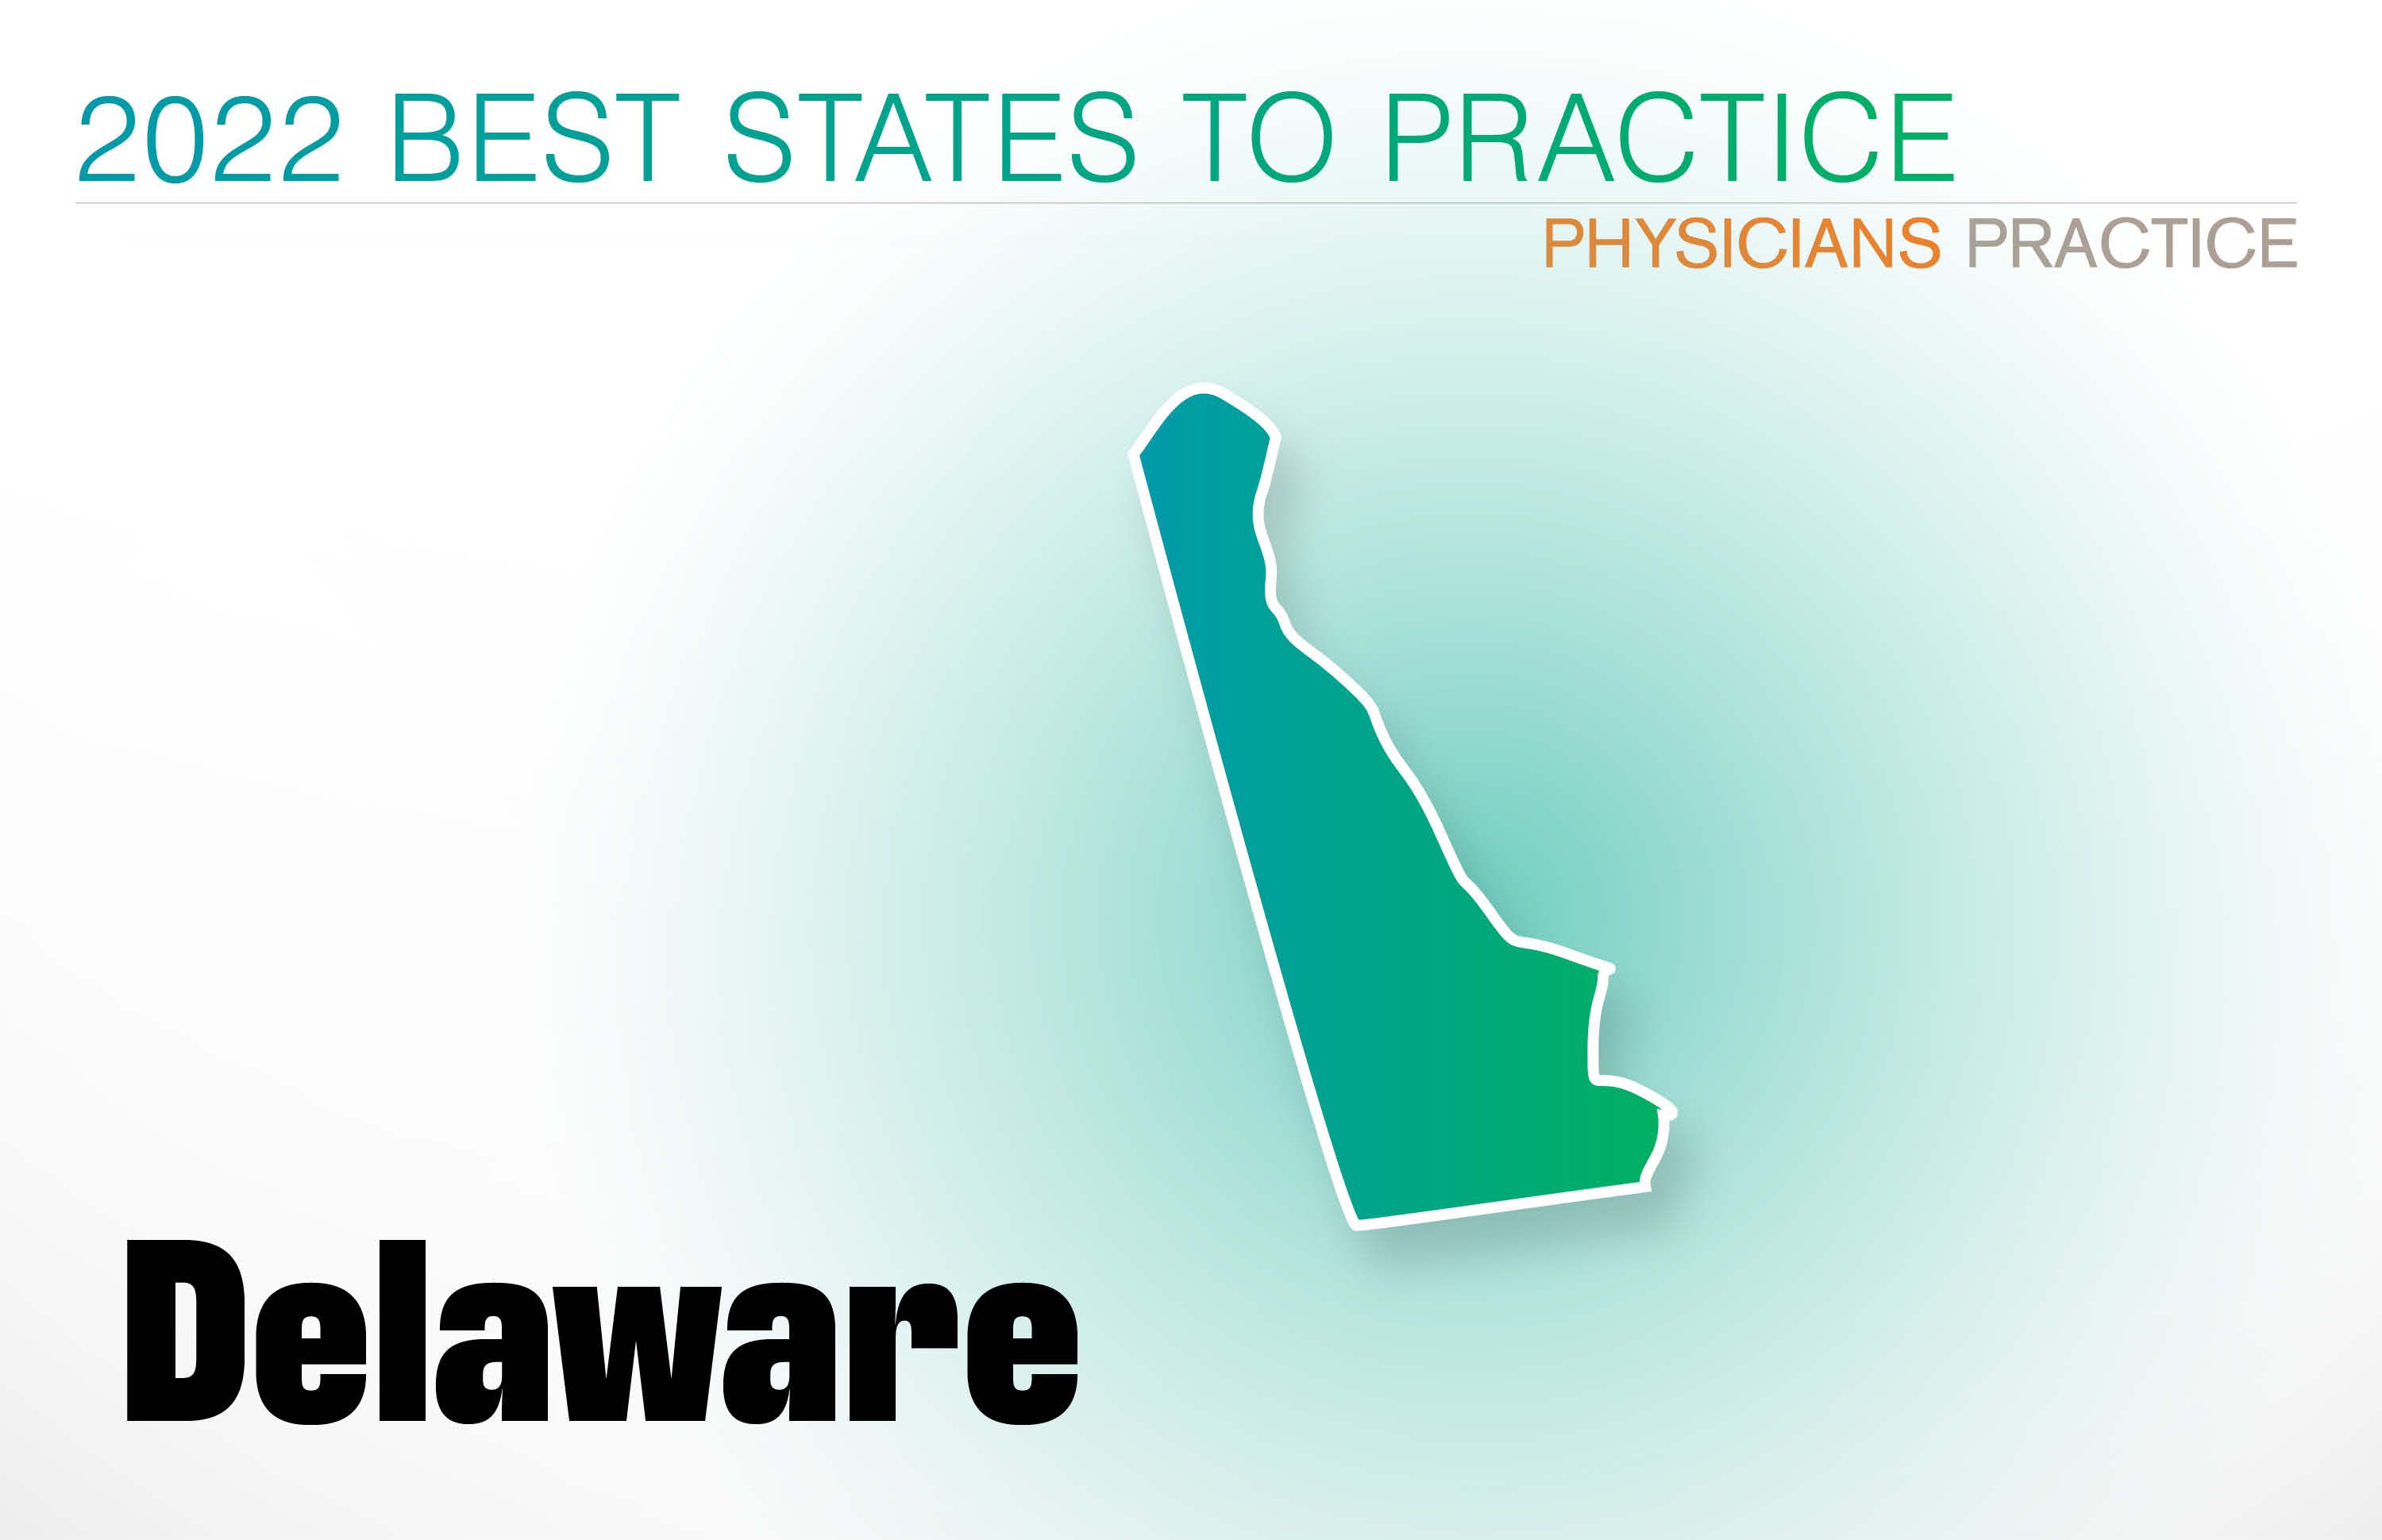 #27 Delaware Rankings: Cost of living: 35 Physician density: 32 Amount of state business taxes collected: 16 Average malpractice insurance rates: 37 Quality of life: 4 GPCI: 32